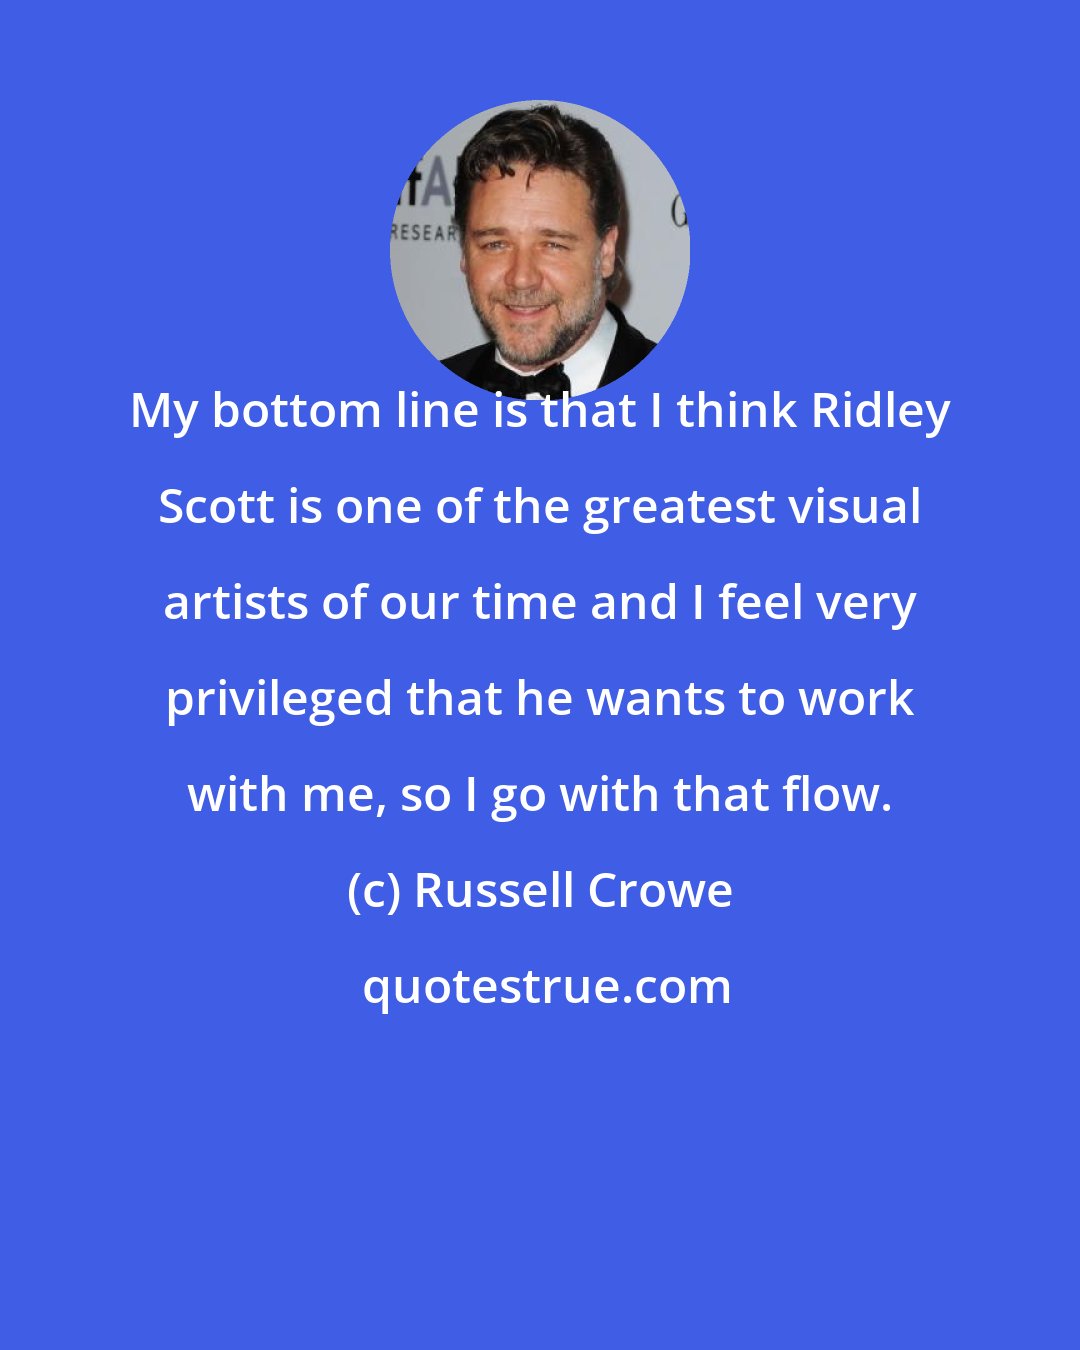 Russell Crowe: My bottom line is that I think Ridley Scott is one of the greatest visual artists of our time and I feel very privileged that he wants to work with me, so I go with that flow.